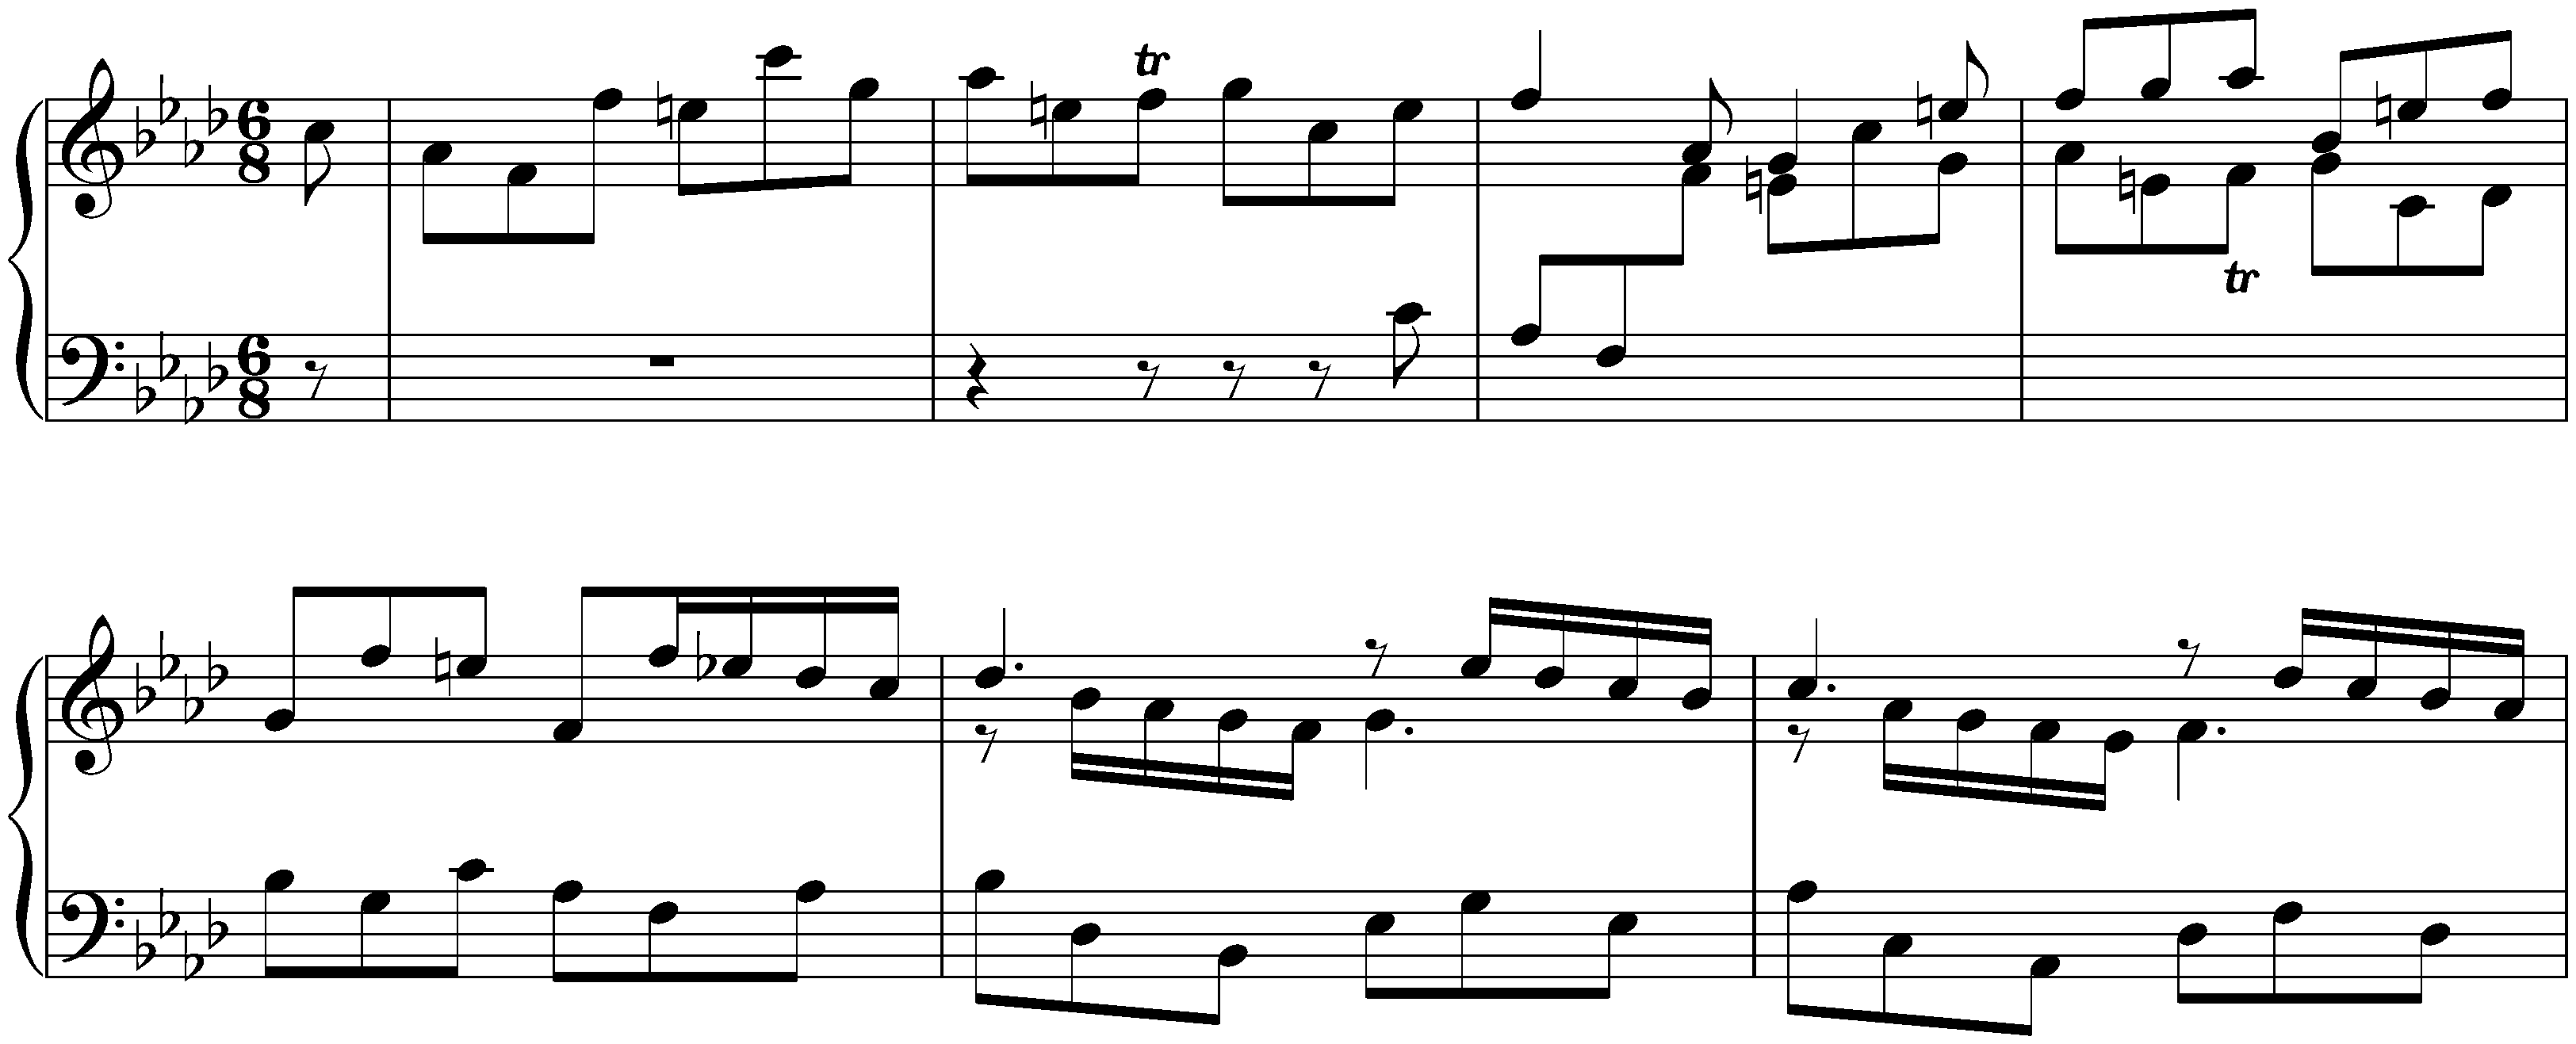 Suite in F minor, HWV 433; 5. Gigue